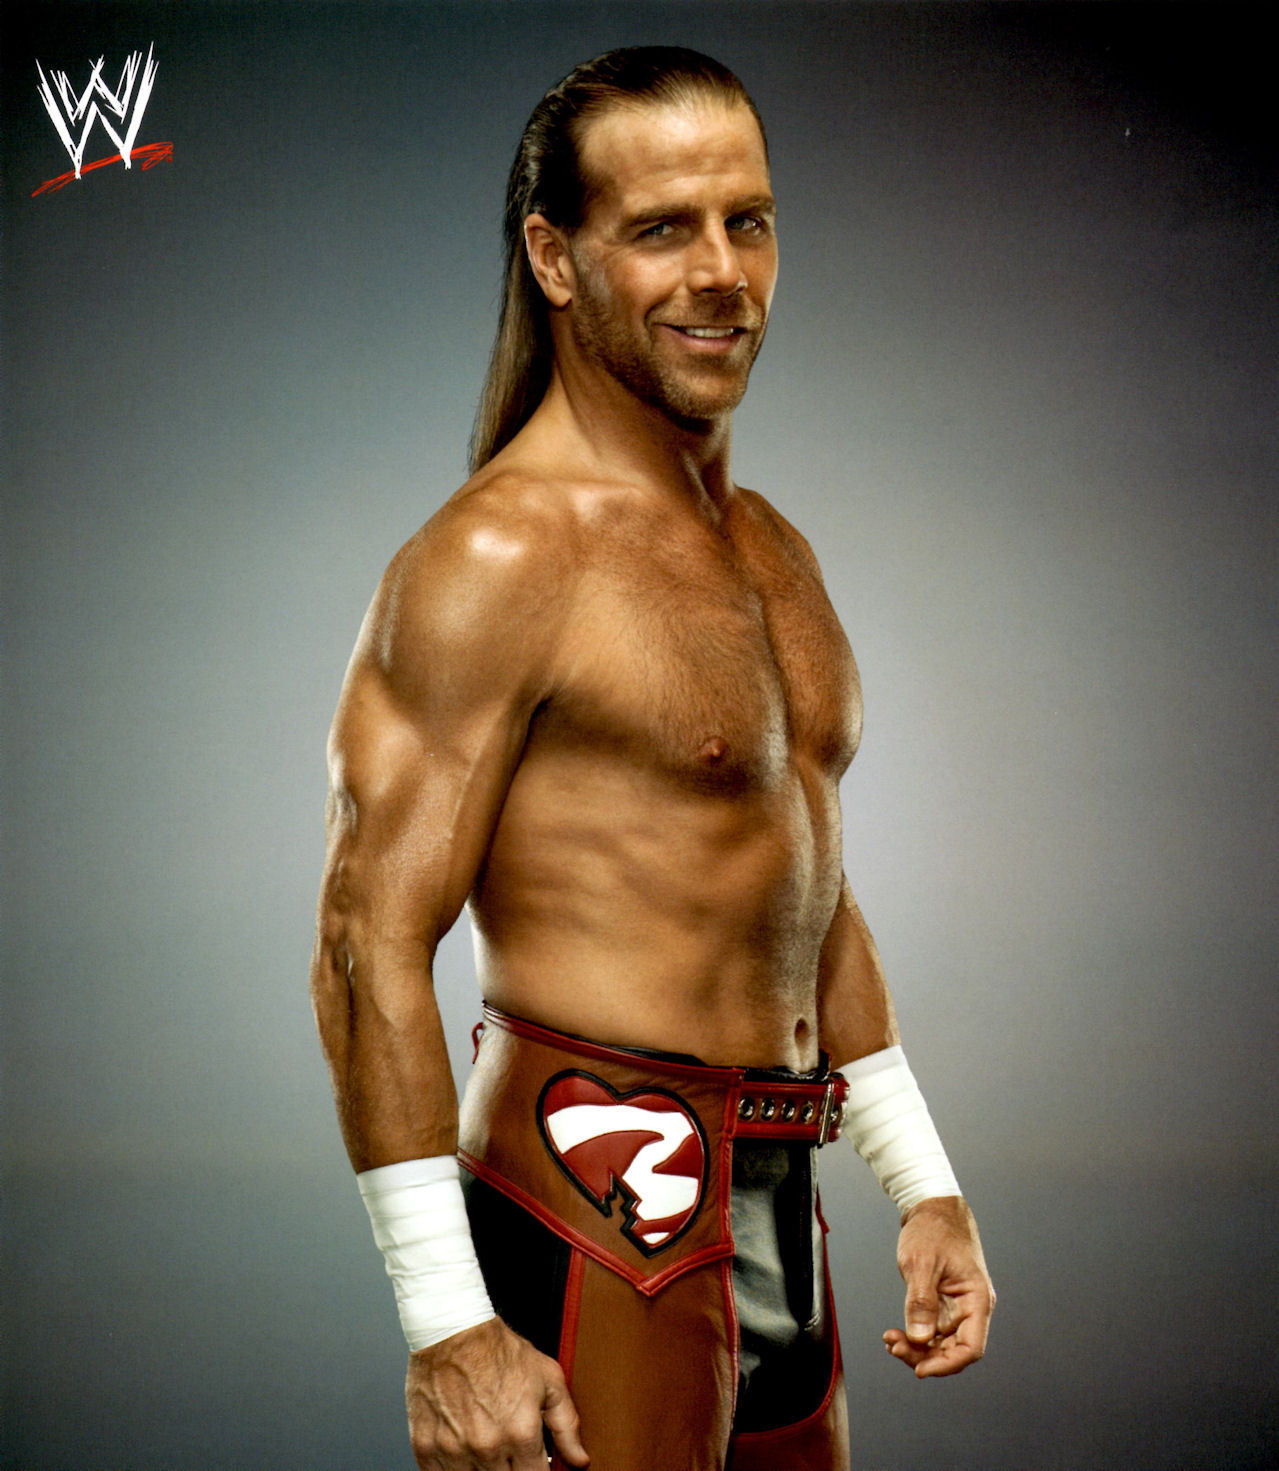 Free download WWE image Shawn Michaels HD wallpaper and background photo 10368117 [1279x1471] for your Desktop, Mobile & Tablet. Explore WWE Shawn Michaels Wallpaper. Shawn Michaels Wallpaper, Hbk Wallpaper